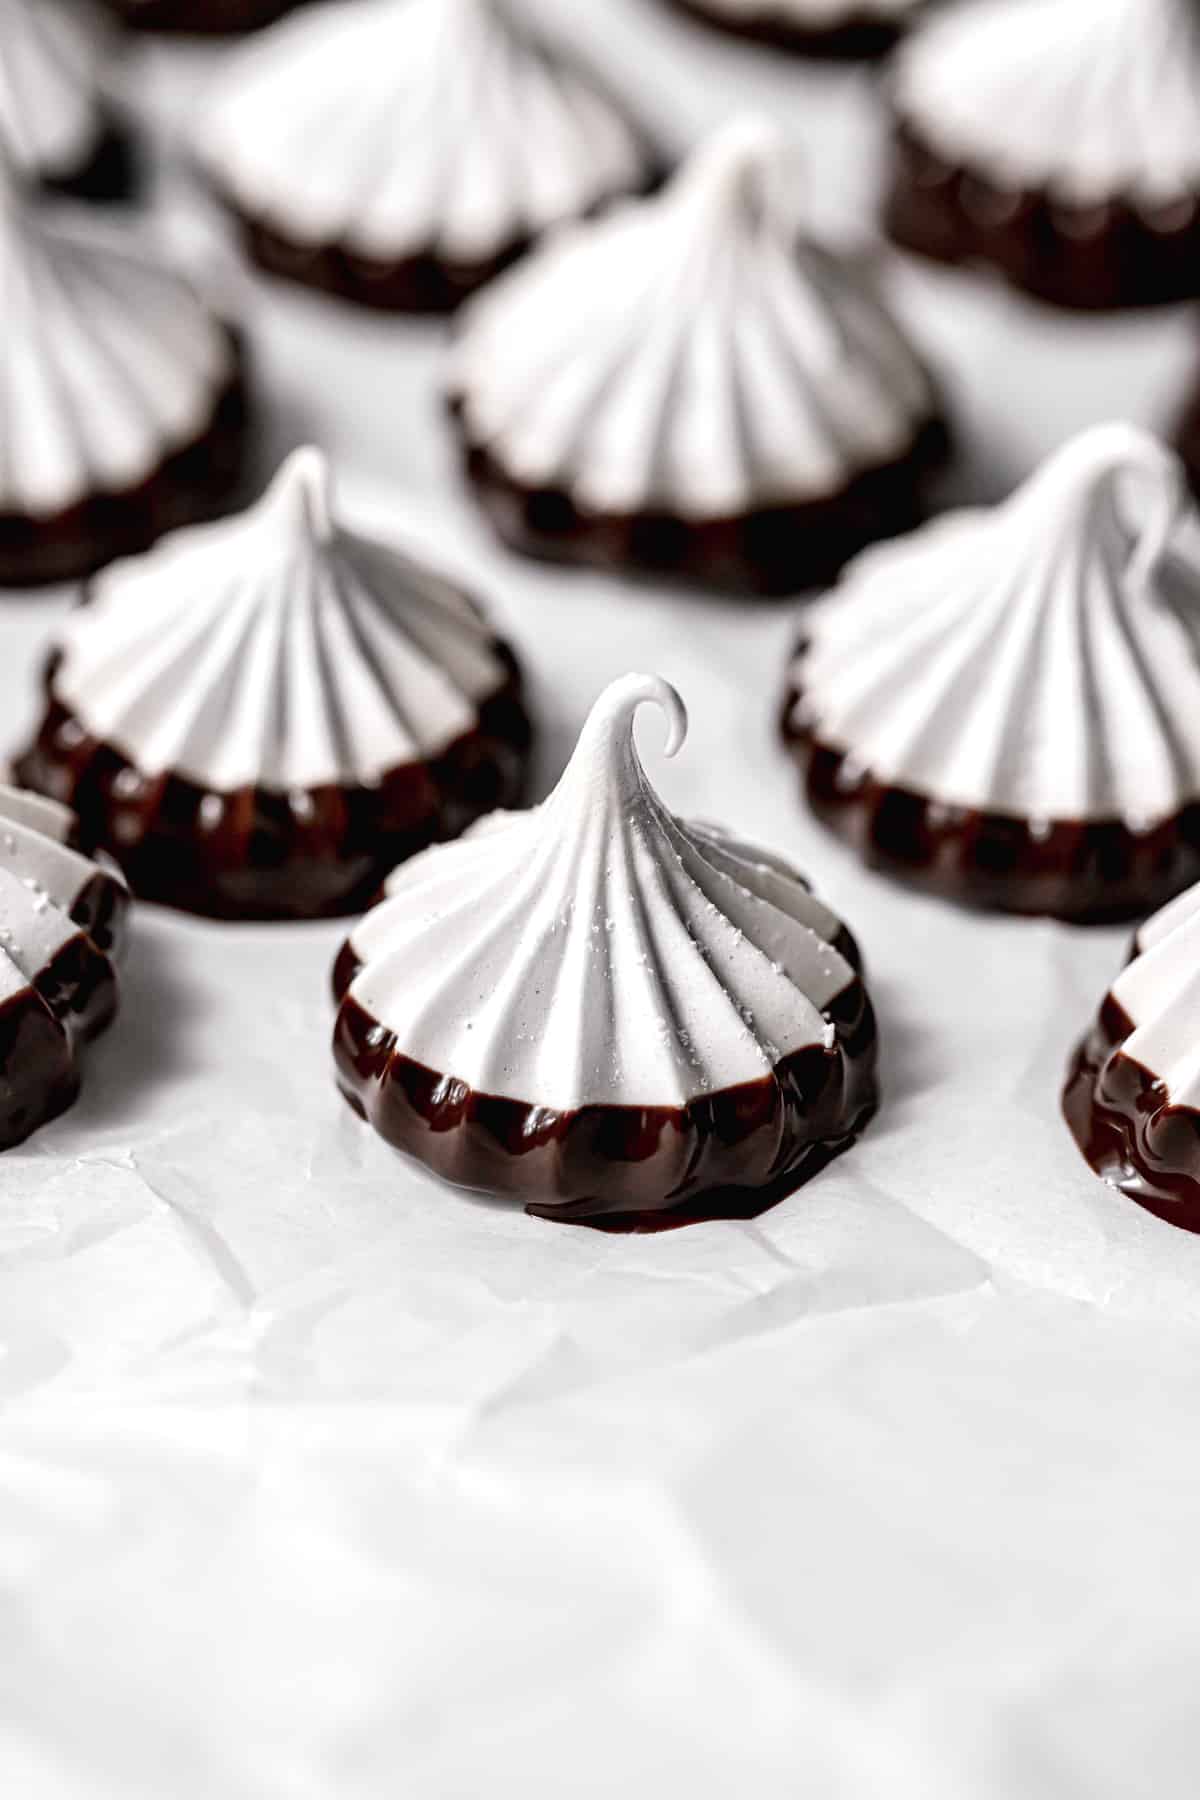 chocolate dipped meringue cookies on parchment paper.